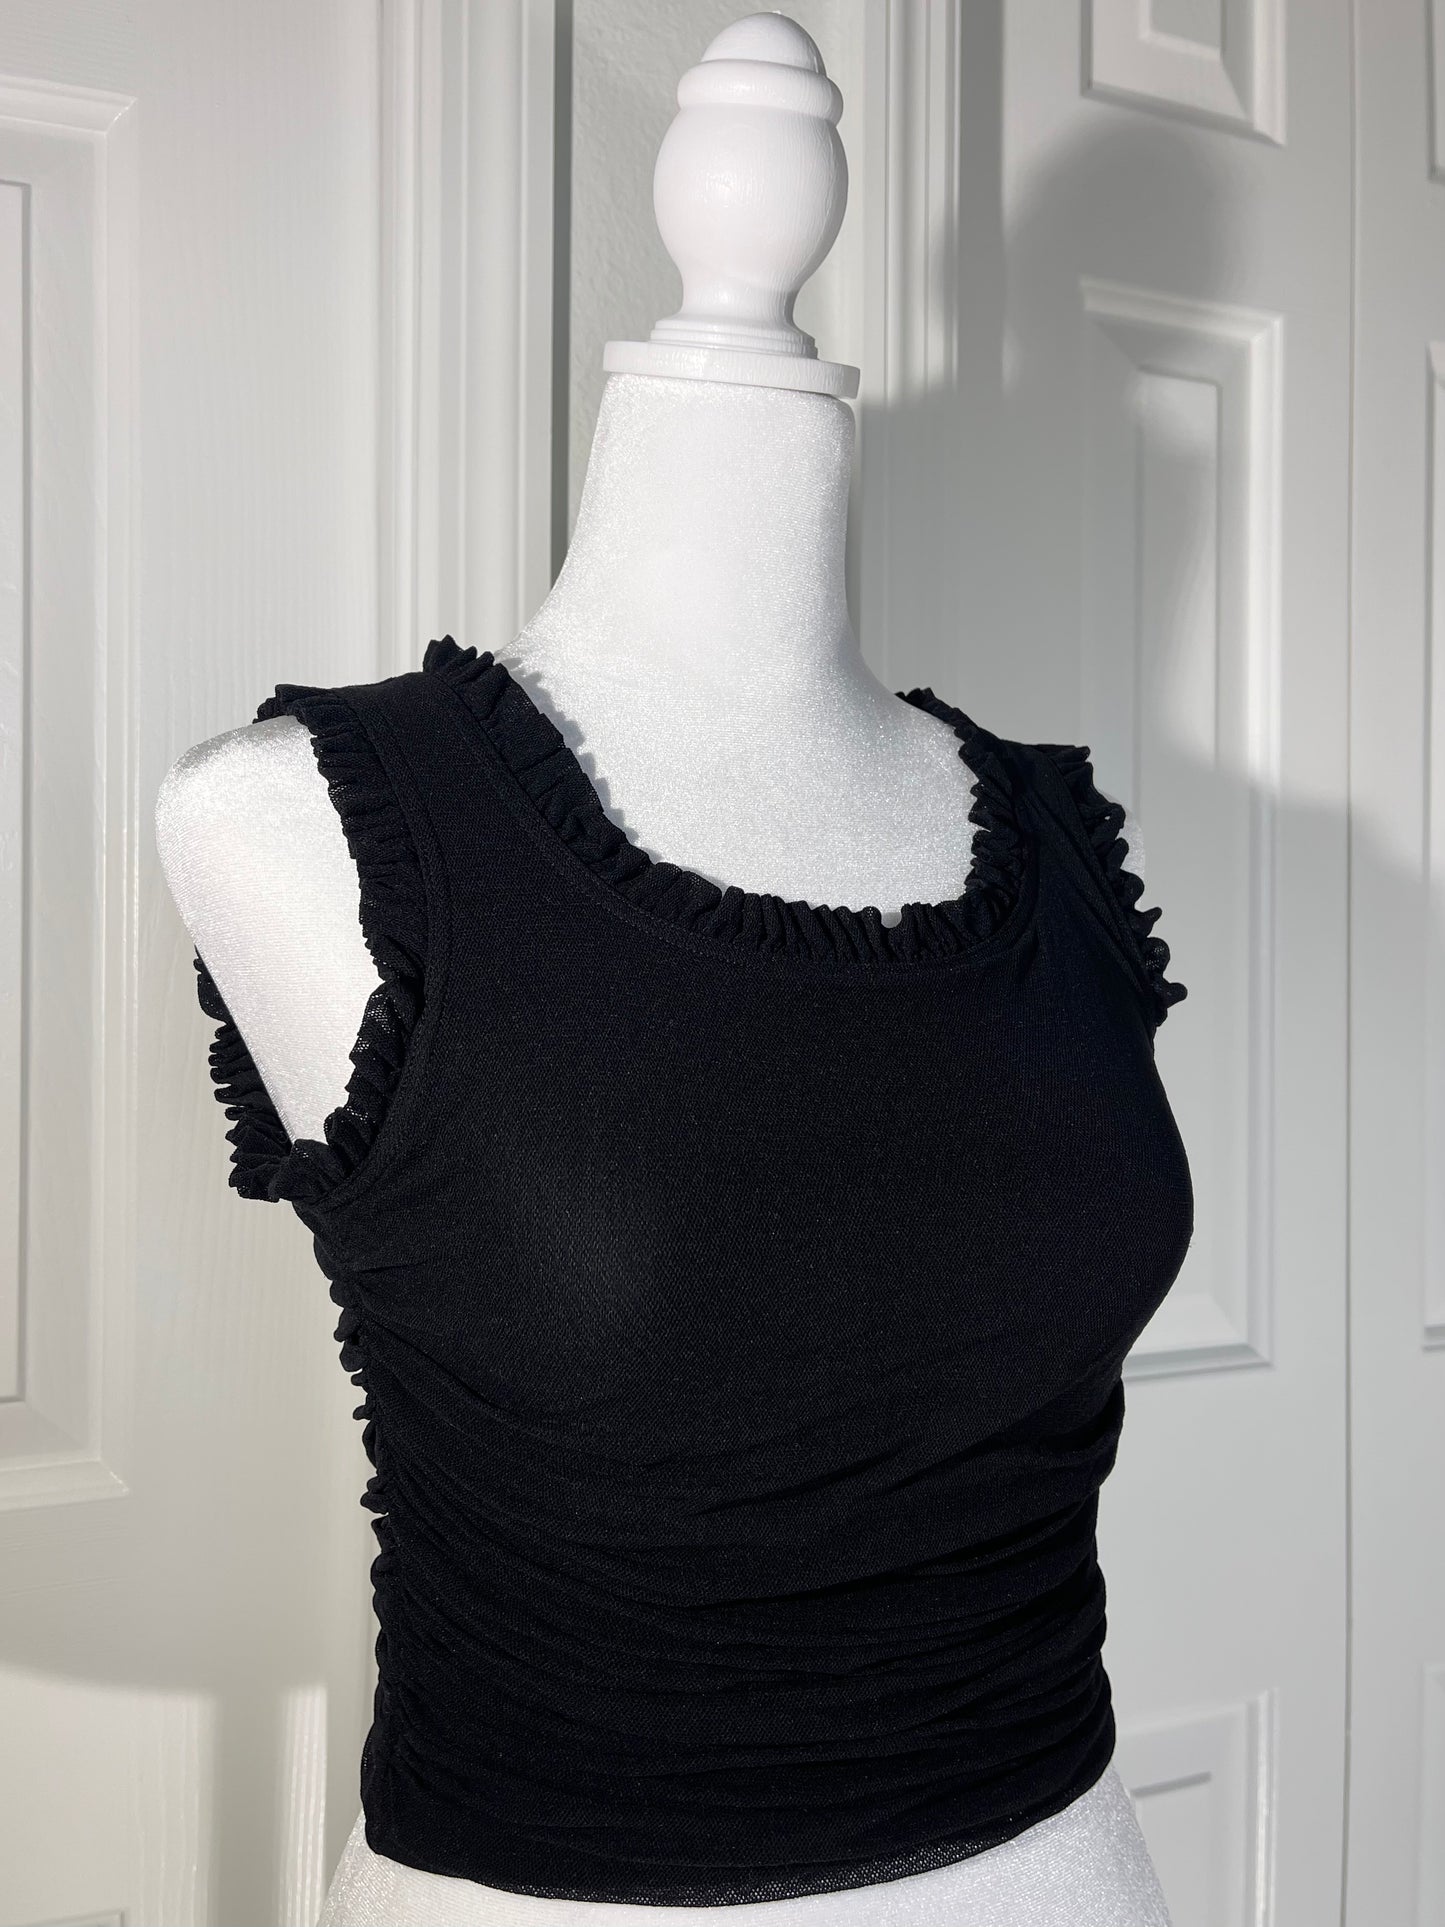 Chanel Vintage 01P Black Ruched Ruffle Cropped Tank Top with Rainbow Sun Detail - Size 42